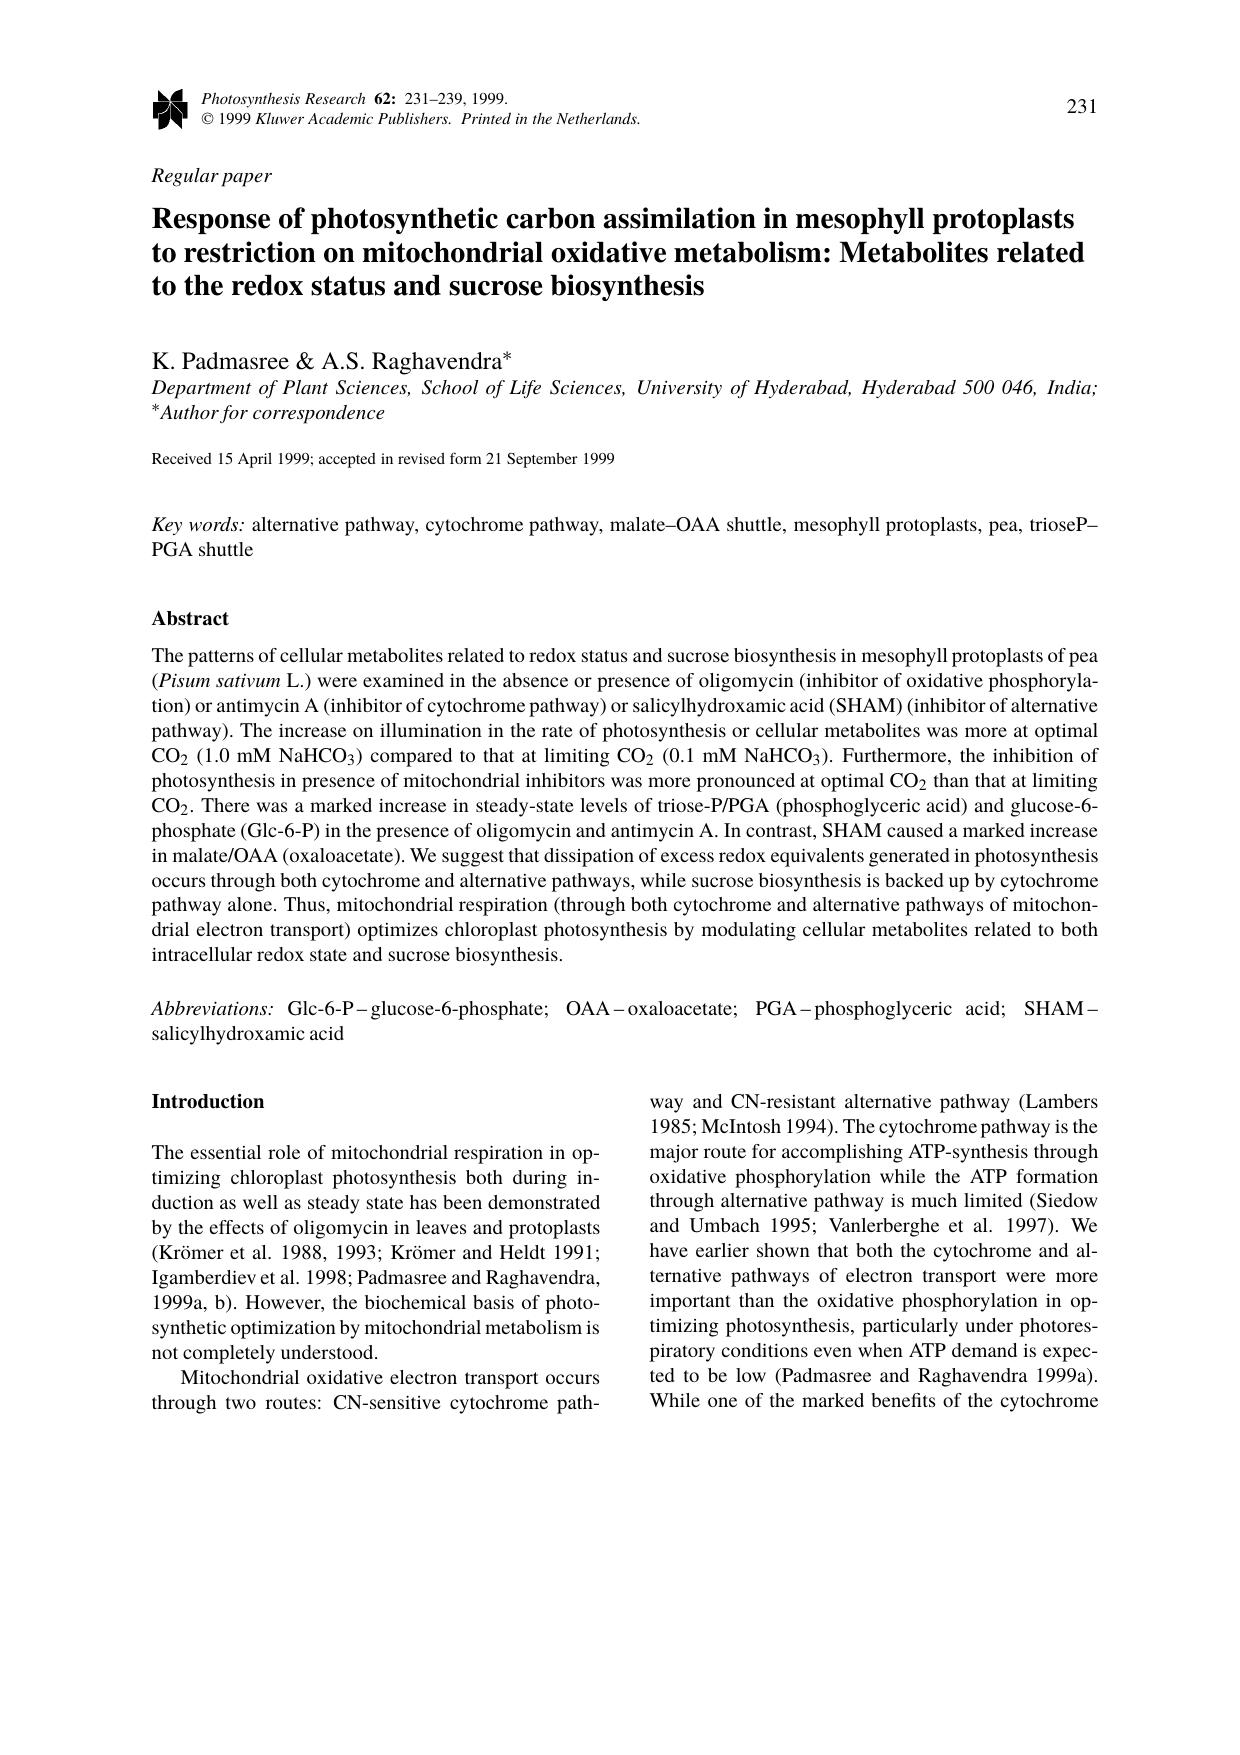 Response of photosynthetic carbon assimilation in mesophyll protoplasts to restriction on mitochondrial oxidative metabolism: Metabolites related to the redox status and sucrose biosynthesis by Unknown